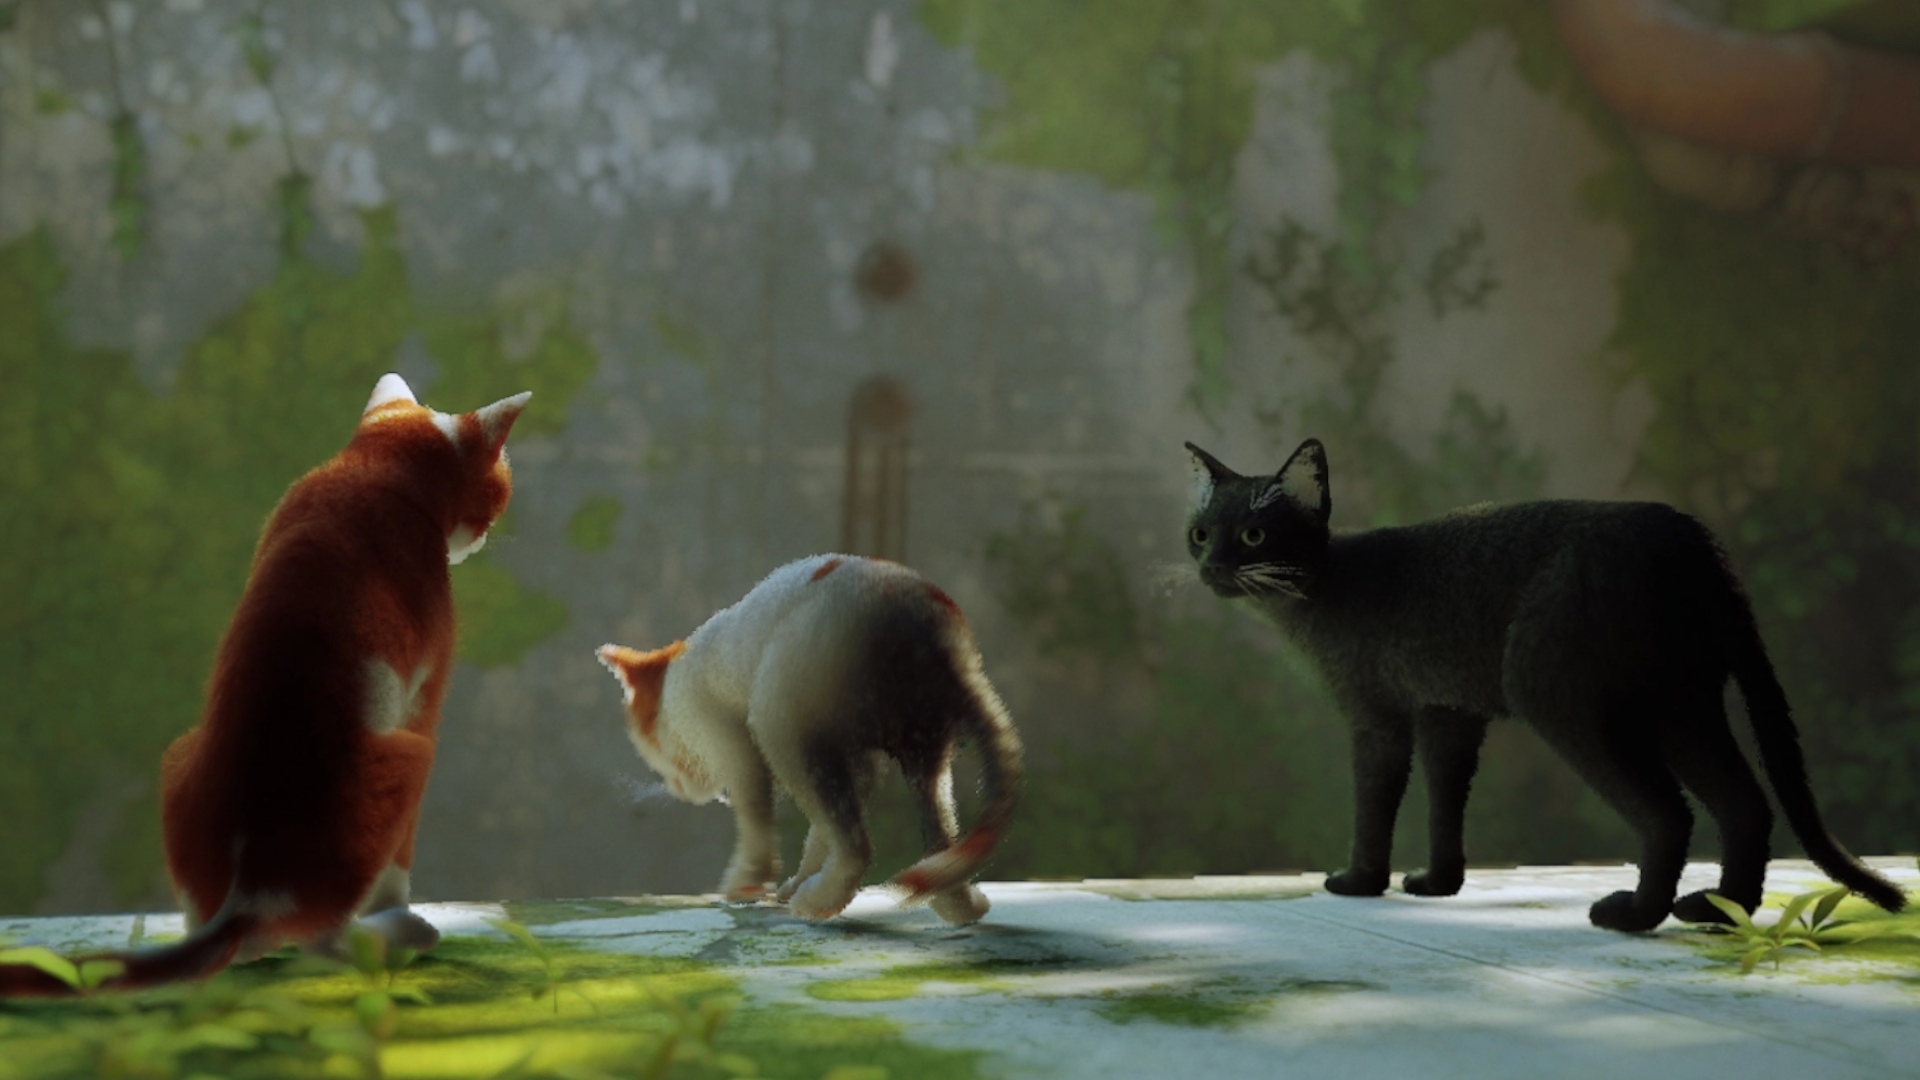 Stray review: The game where you play as a cat is a meow-sterpiece